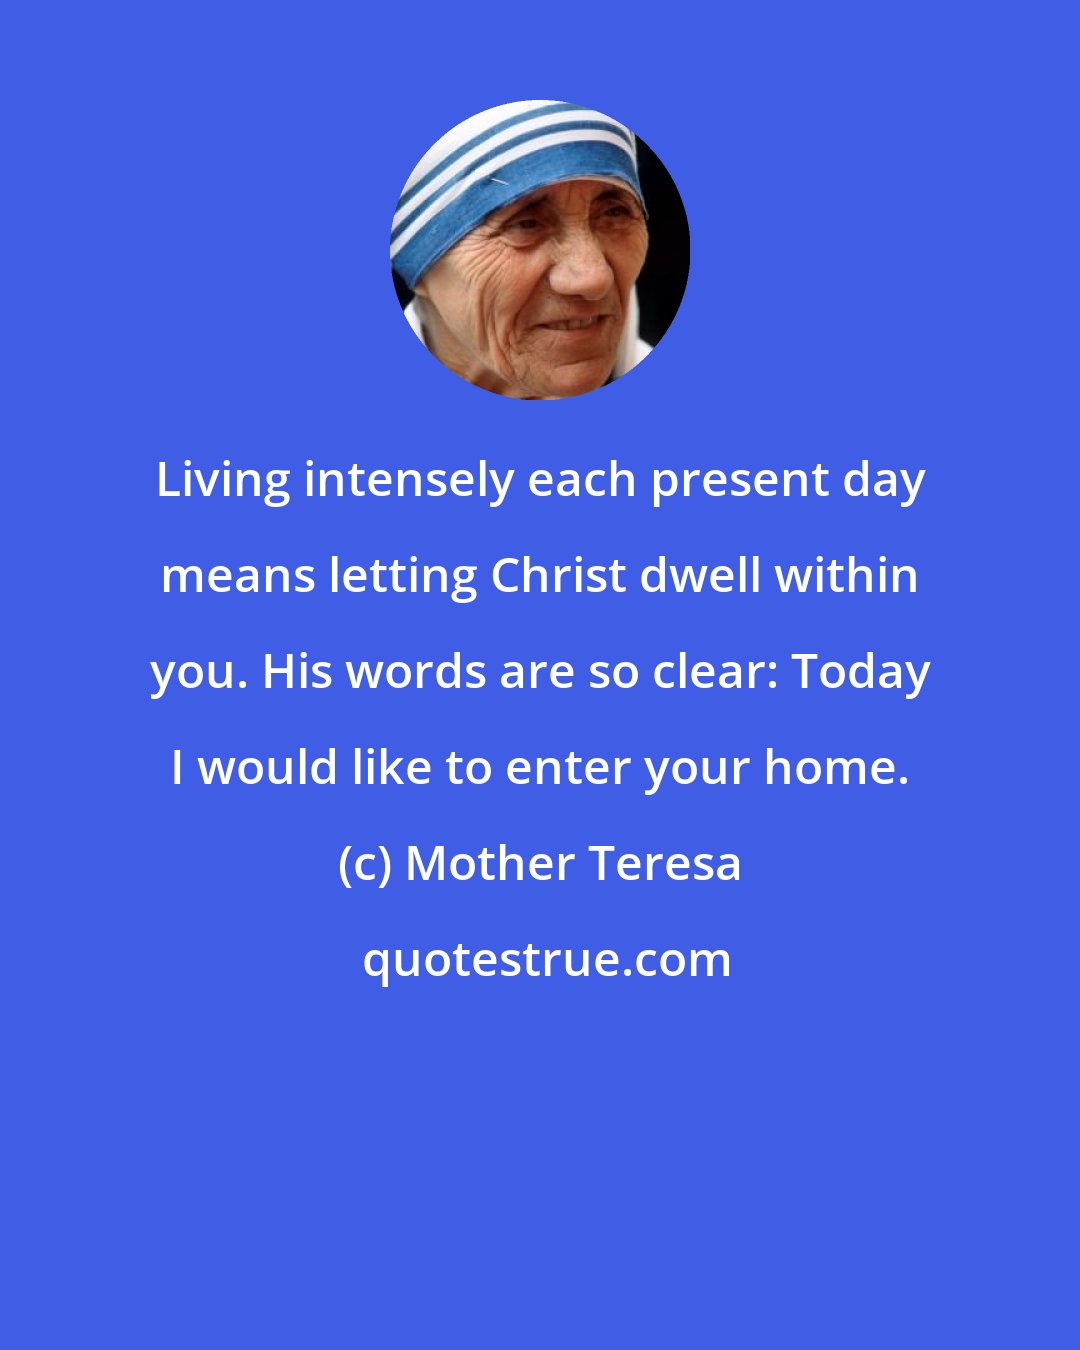 Mother Teresa: Living intensely each present day means letting Christ dwell within you. His words are so clear: Today I would like to enter your home.